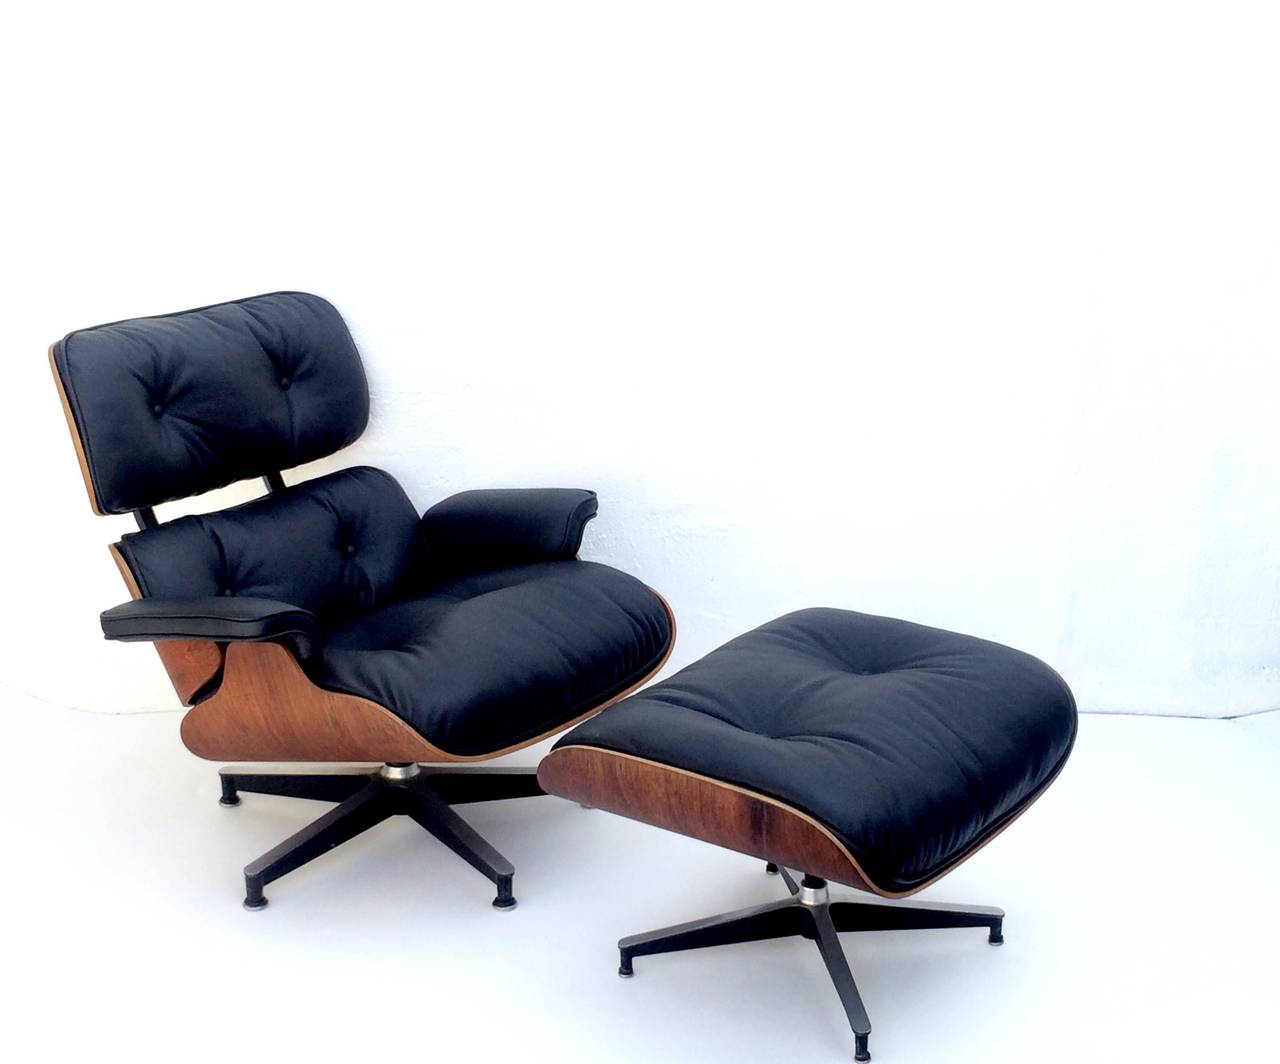 An early 1950s down filled rosewood Eames 670 lounge chair and a 671 ottoman
Chair is 32